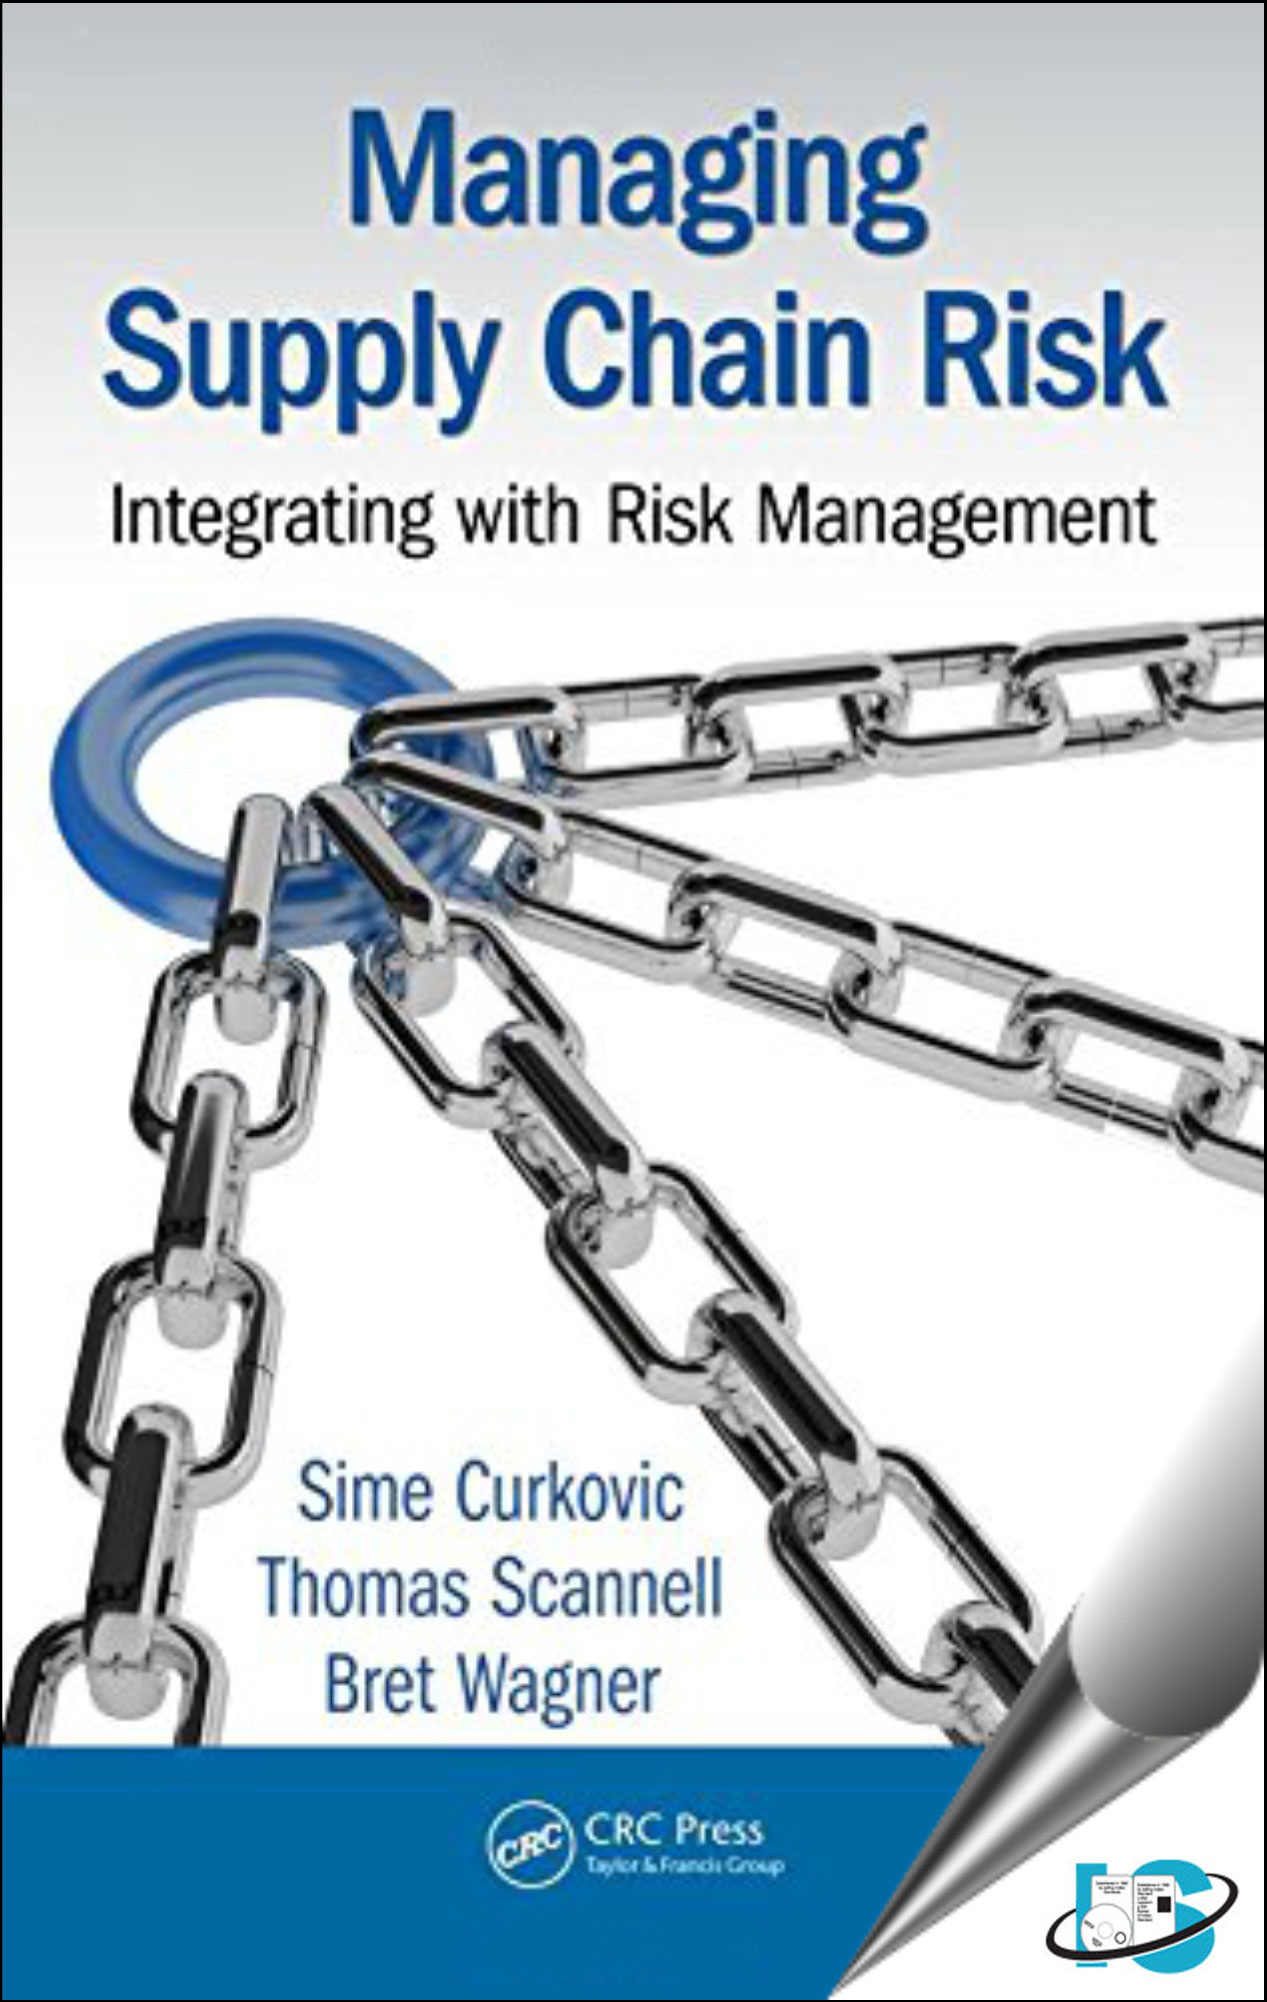 phd thesis on supply chain risk management